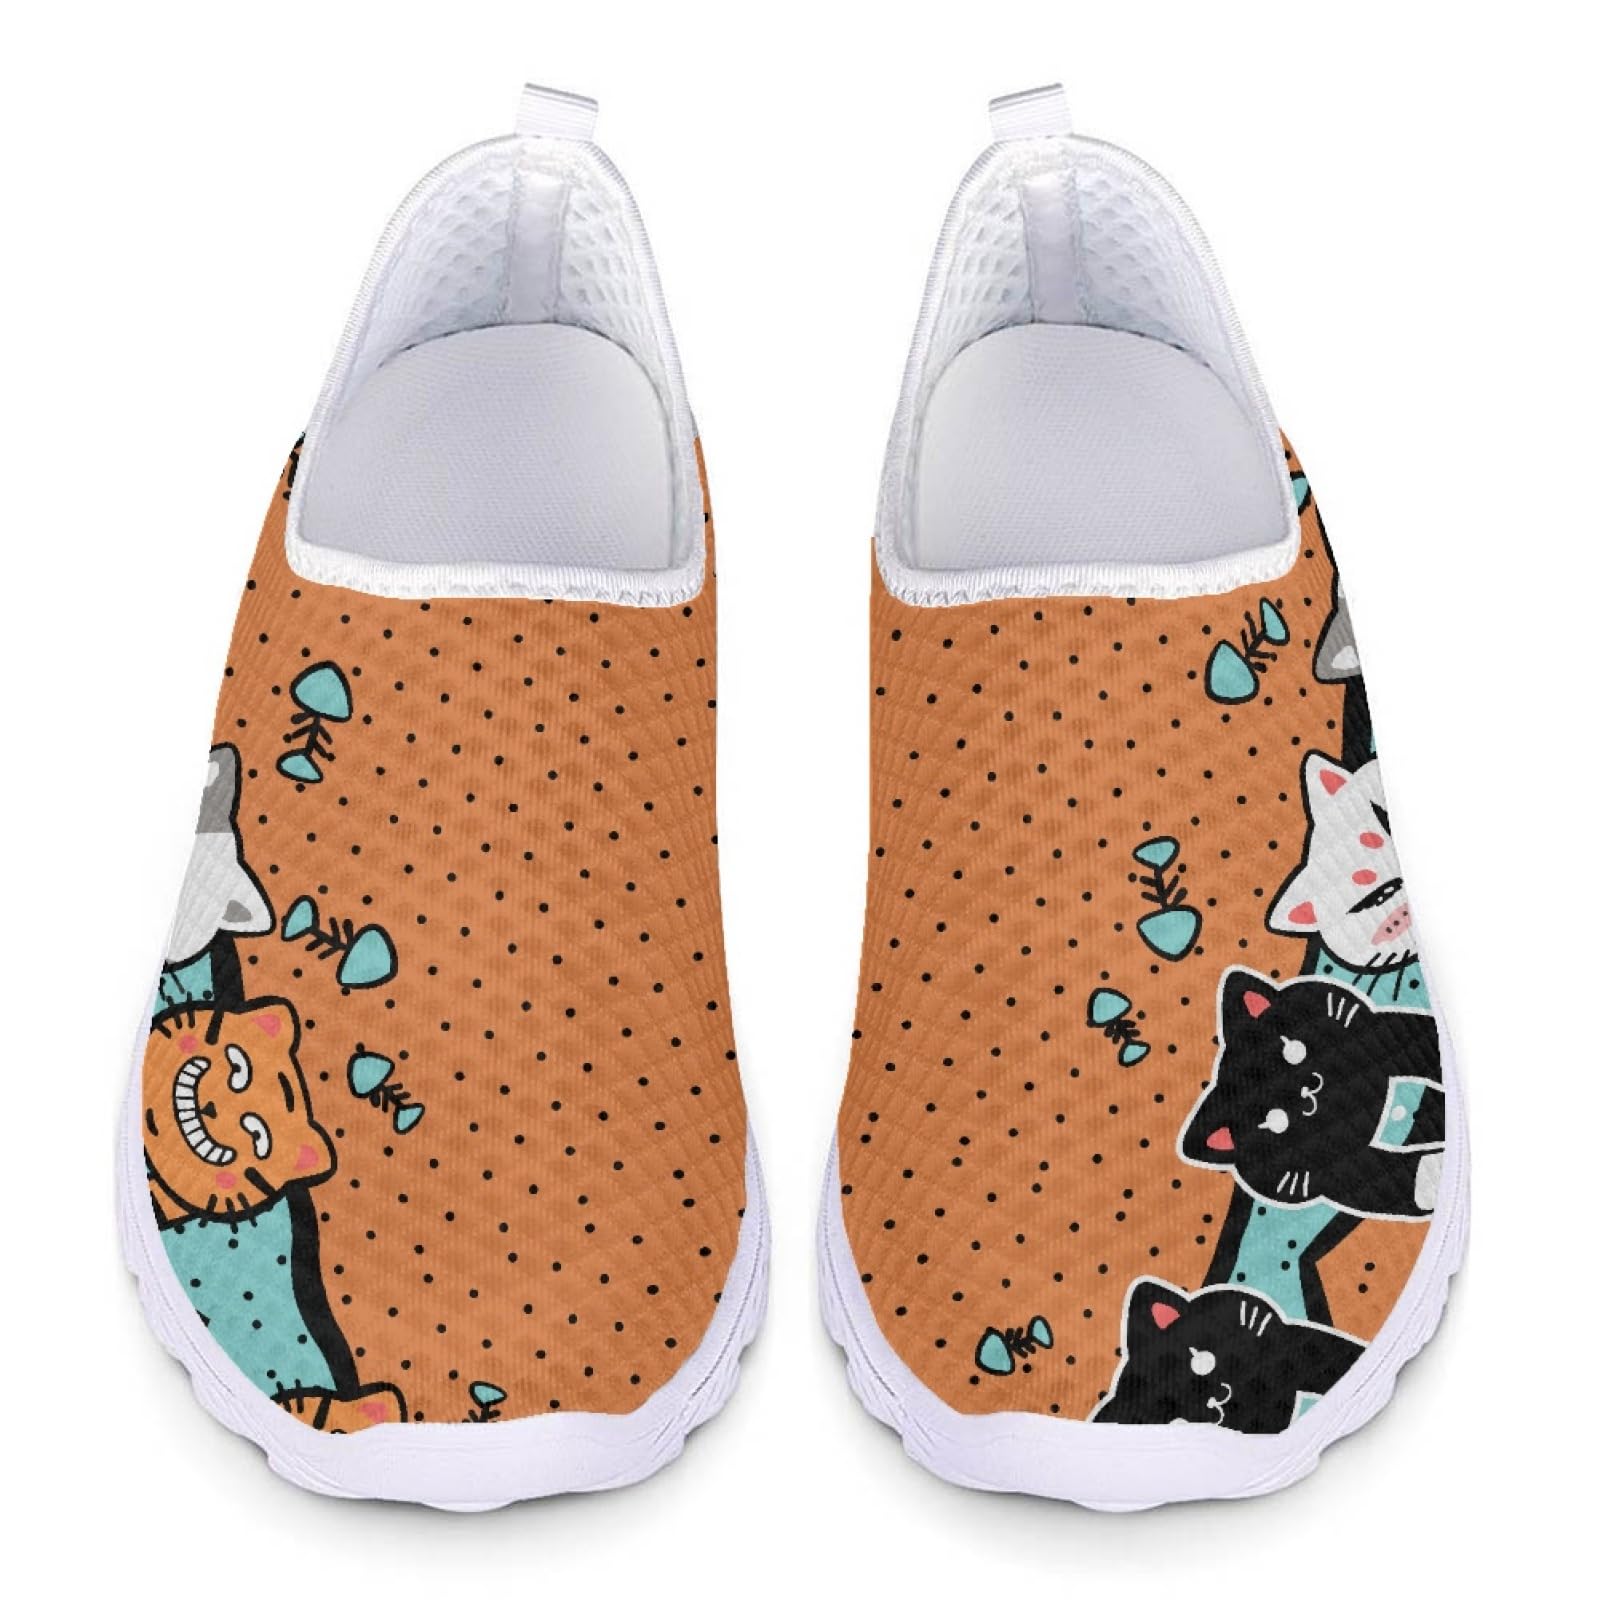 GOSTONG Funny Cat Print Super Light Weight Jogging Sneakers Animal Women's Breathable Athletic Shoes Trainers Summer Mesh Shoe Comfortable Memory Foam Running Shoes